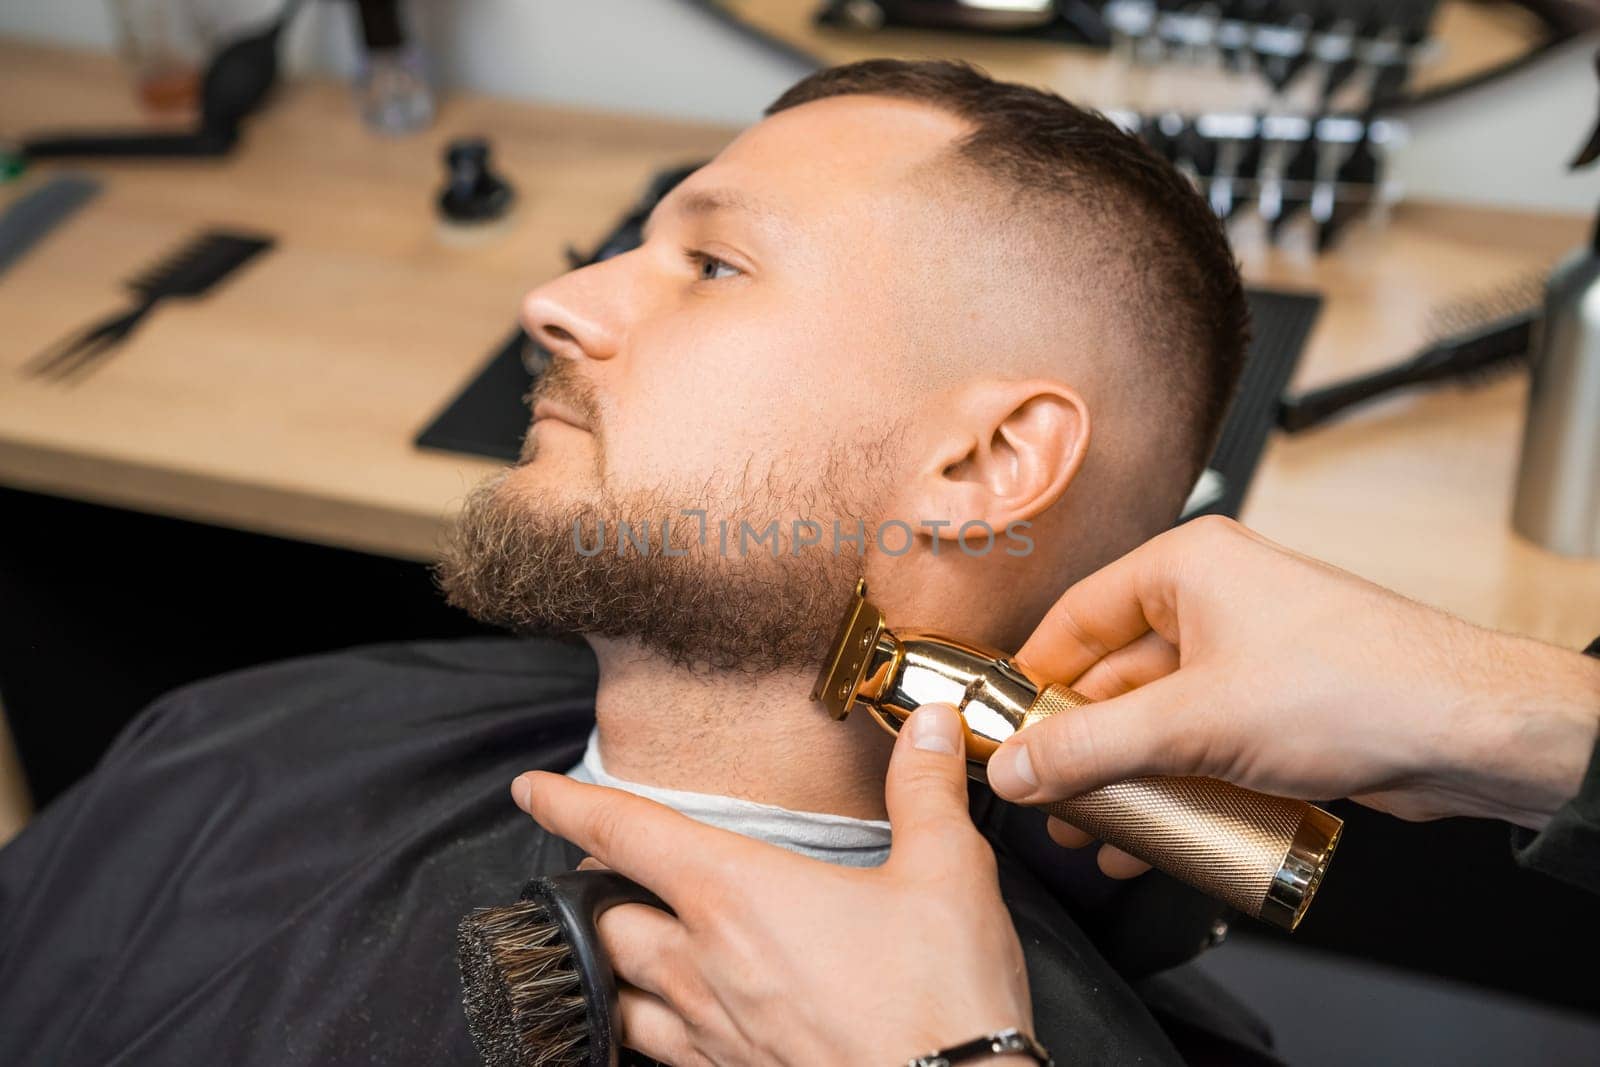 Barber skillfully uses a trimmer to shape the clients beard, focusing on the contours of the cheek.